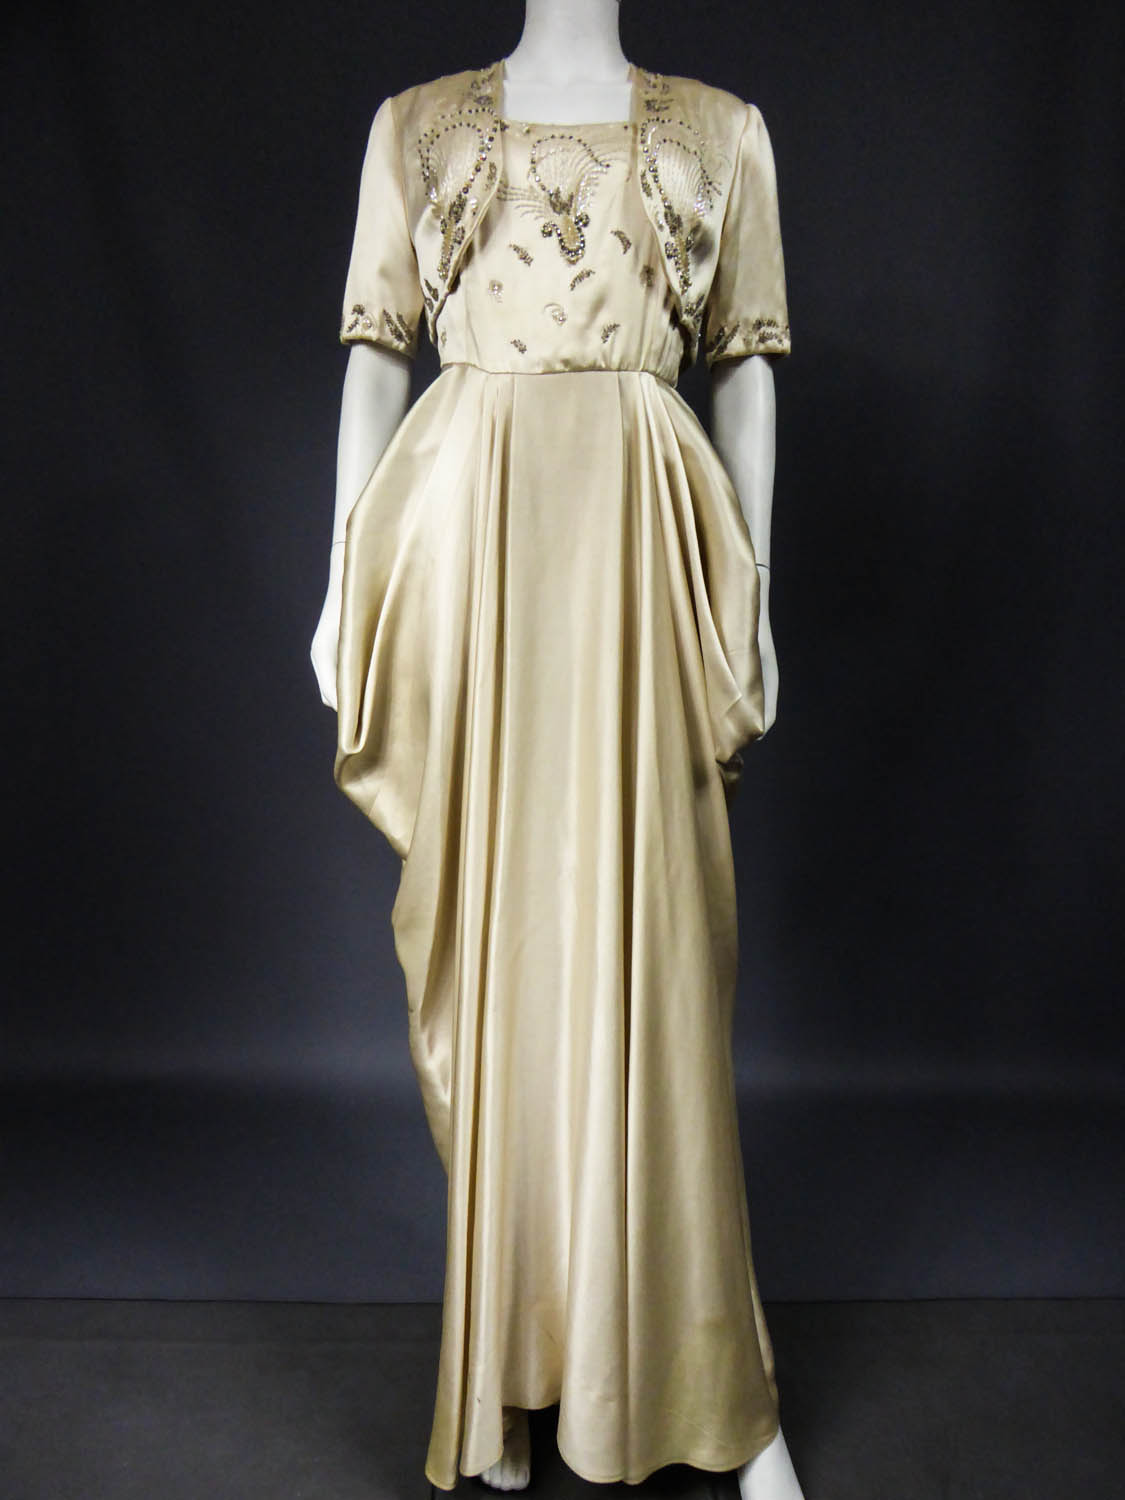 Paris, France. 13th Apr, 2022. A designer dress by Pierre Balmain is  exhibited during the permanent exhibition at the Palais Galliera museum.  The Palais Galliera also called the Fashion Museum of the